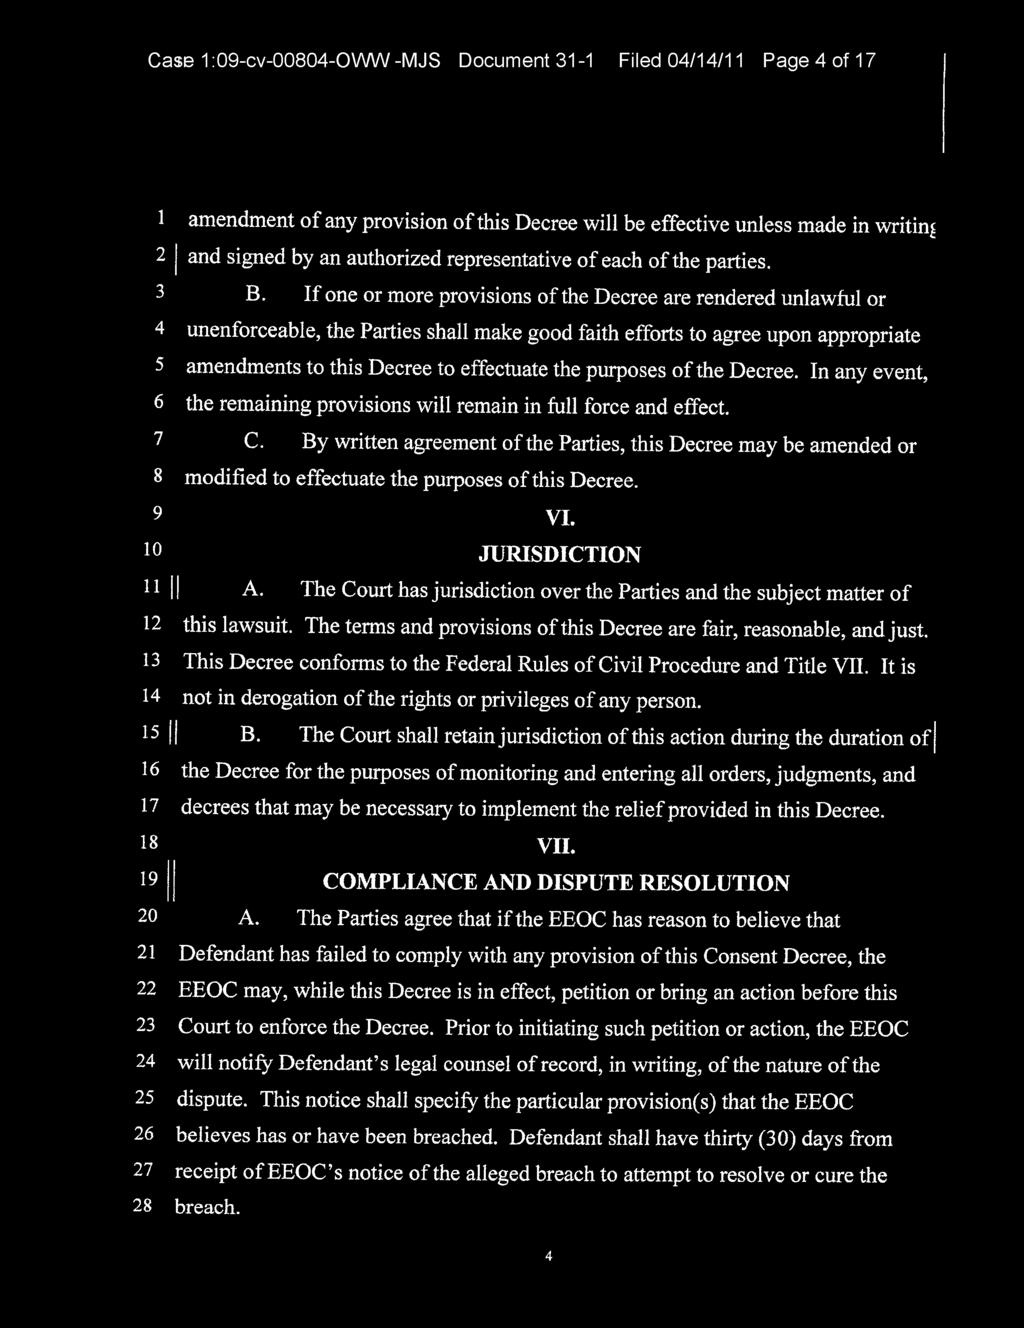 Case 1:0-cv-0004-OWW -MJS Document 31-1 Filed 04/14/11 Page 4 of 1 amendment of any provision of this Decree will be effective unless made in writing 2 and signed by an authorized representative of